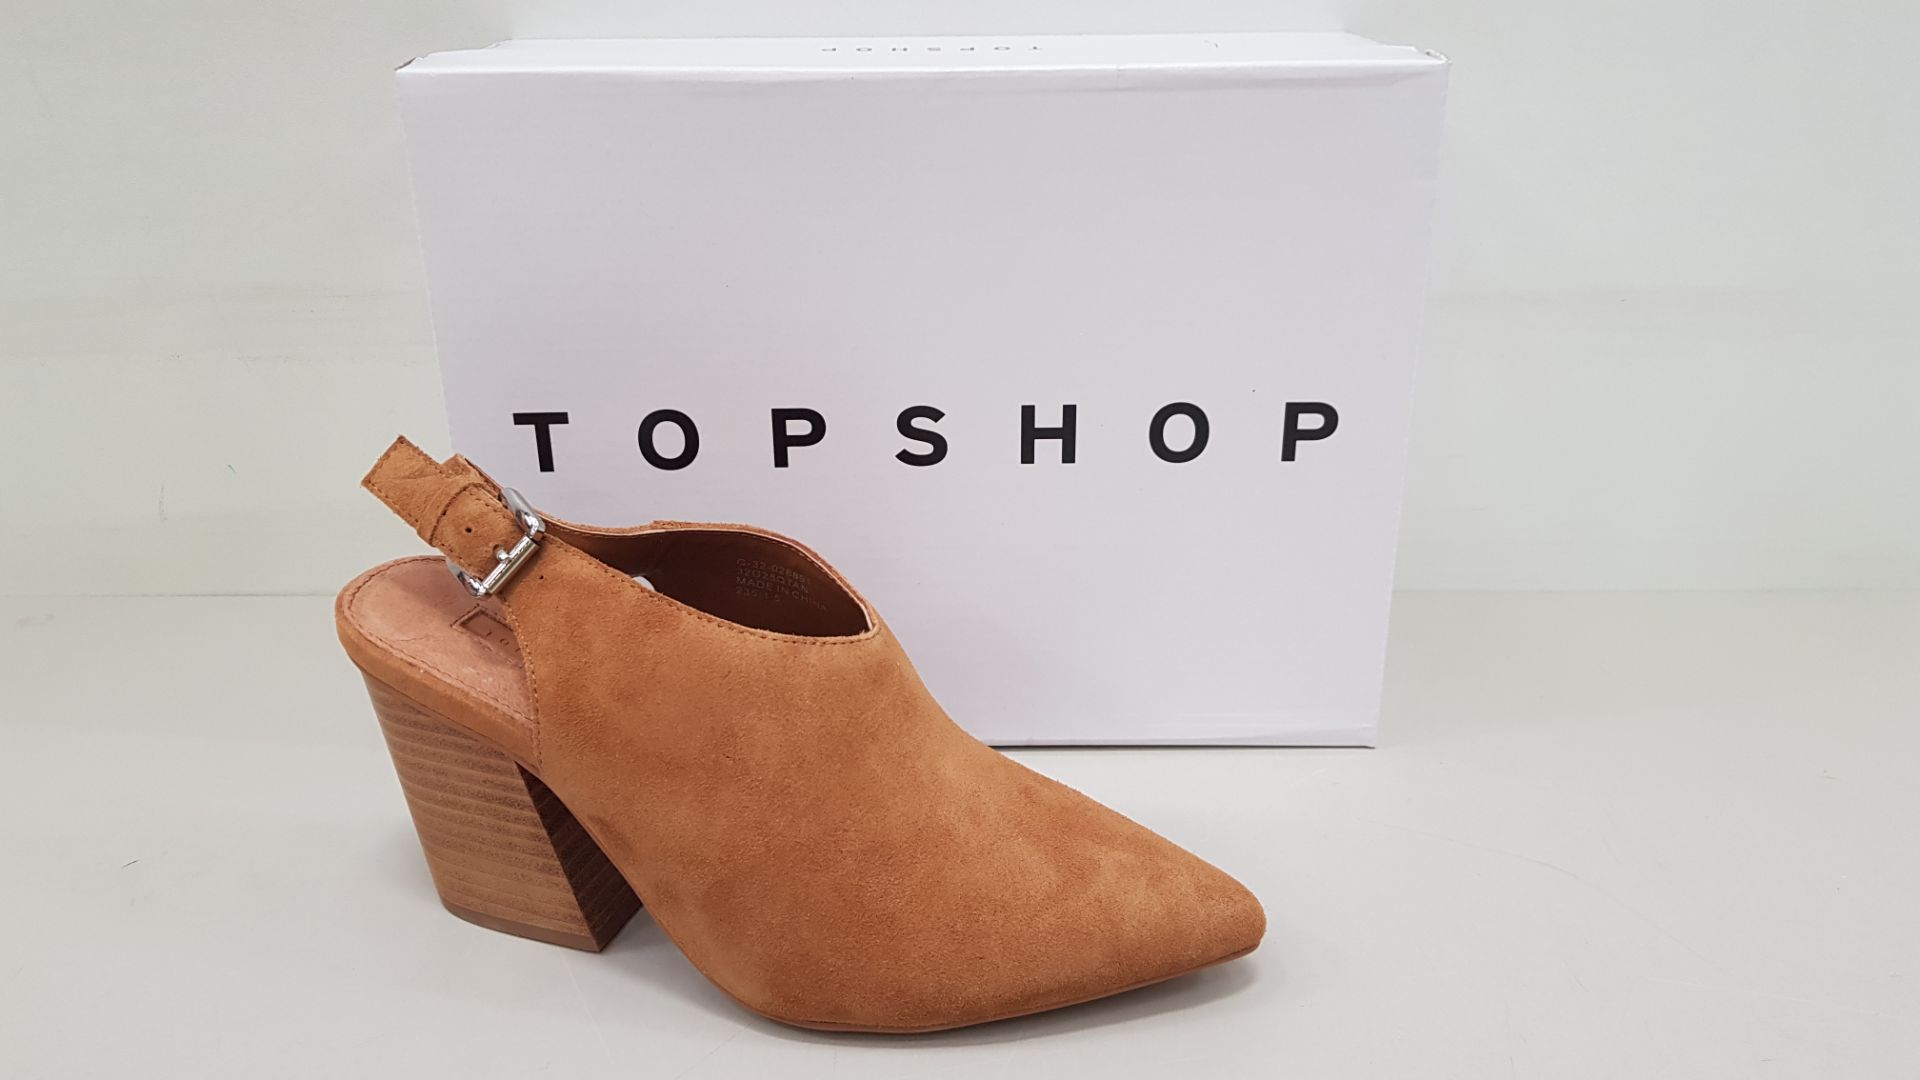 15 X BRAND NEW TOPSHOP GOJI TAN WEDGED HEELED SHOES UK SIZE 2, 3 AND 9 RRP £46.00 (TOTAL RRP £690.